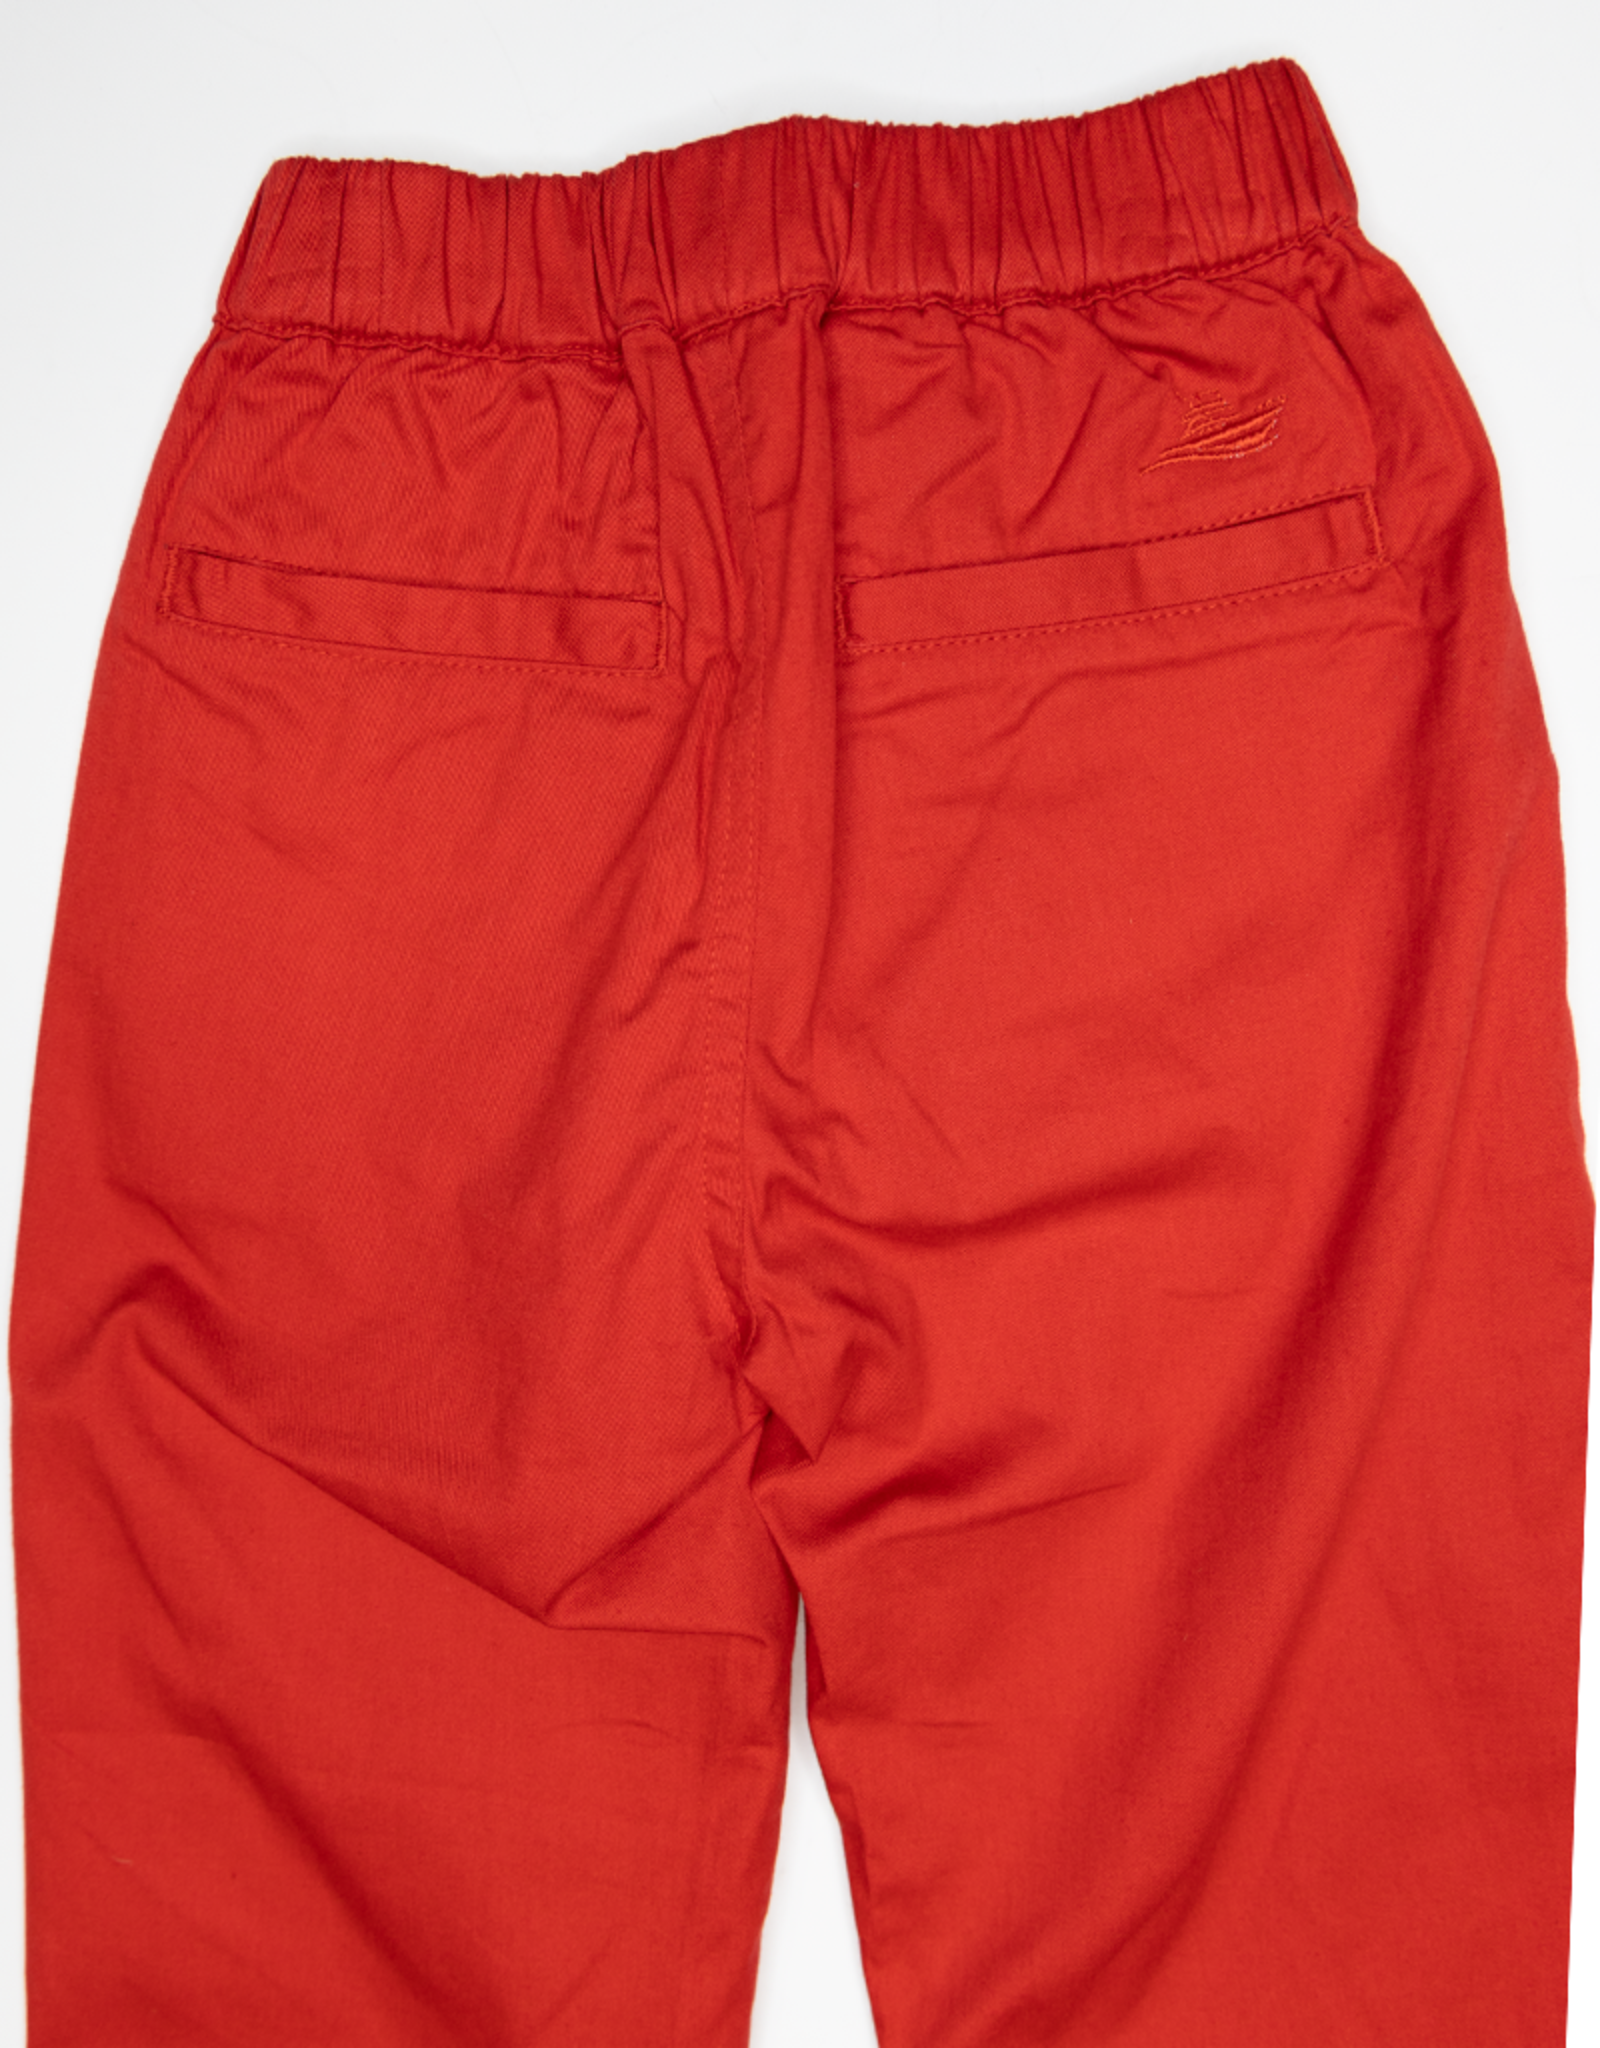 South Bound SBound Elastic Pants 3208 Red